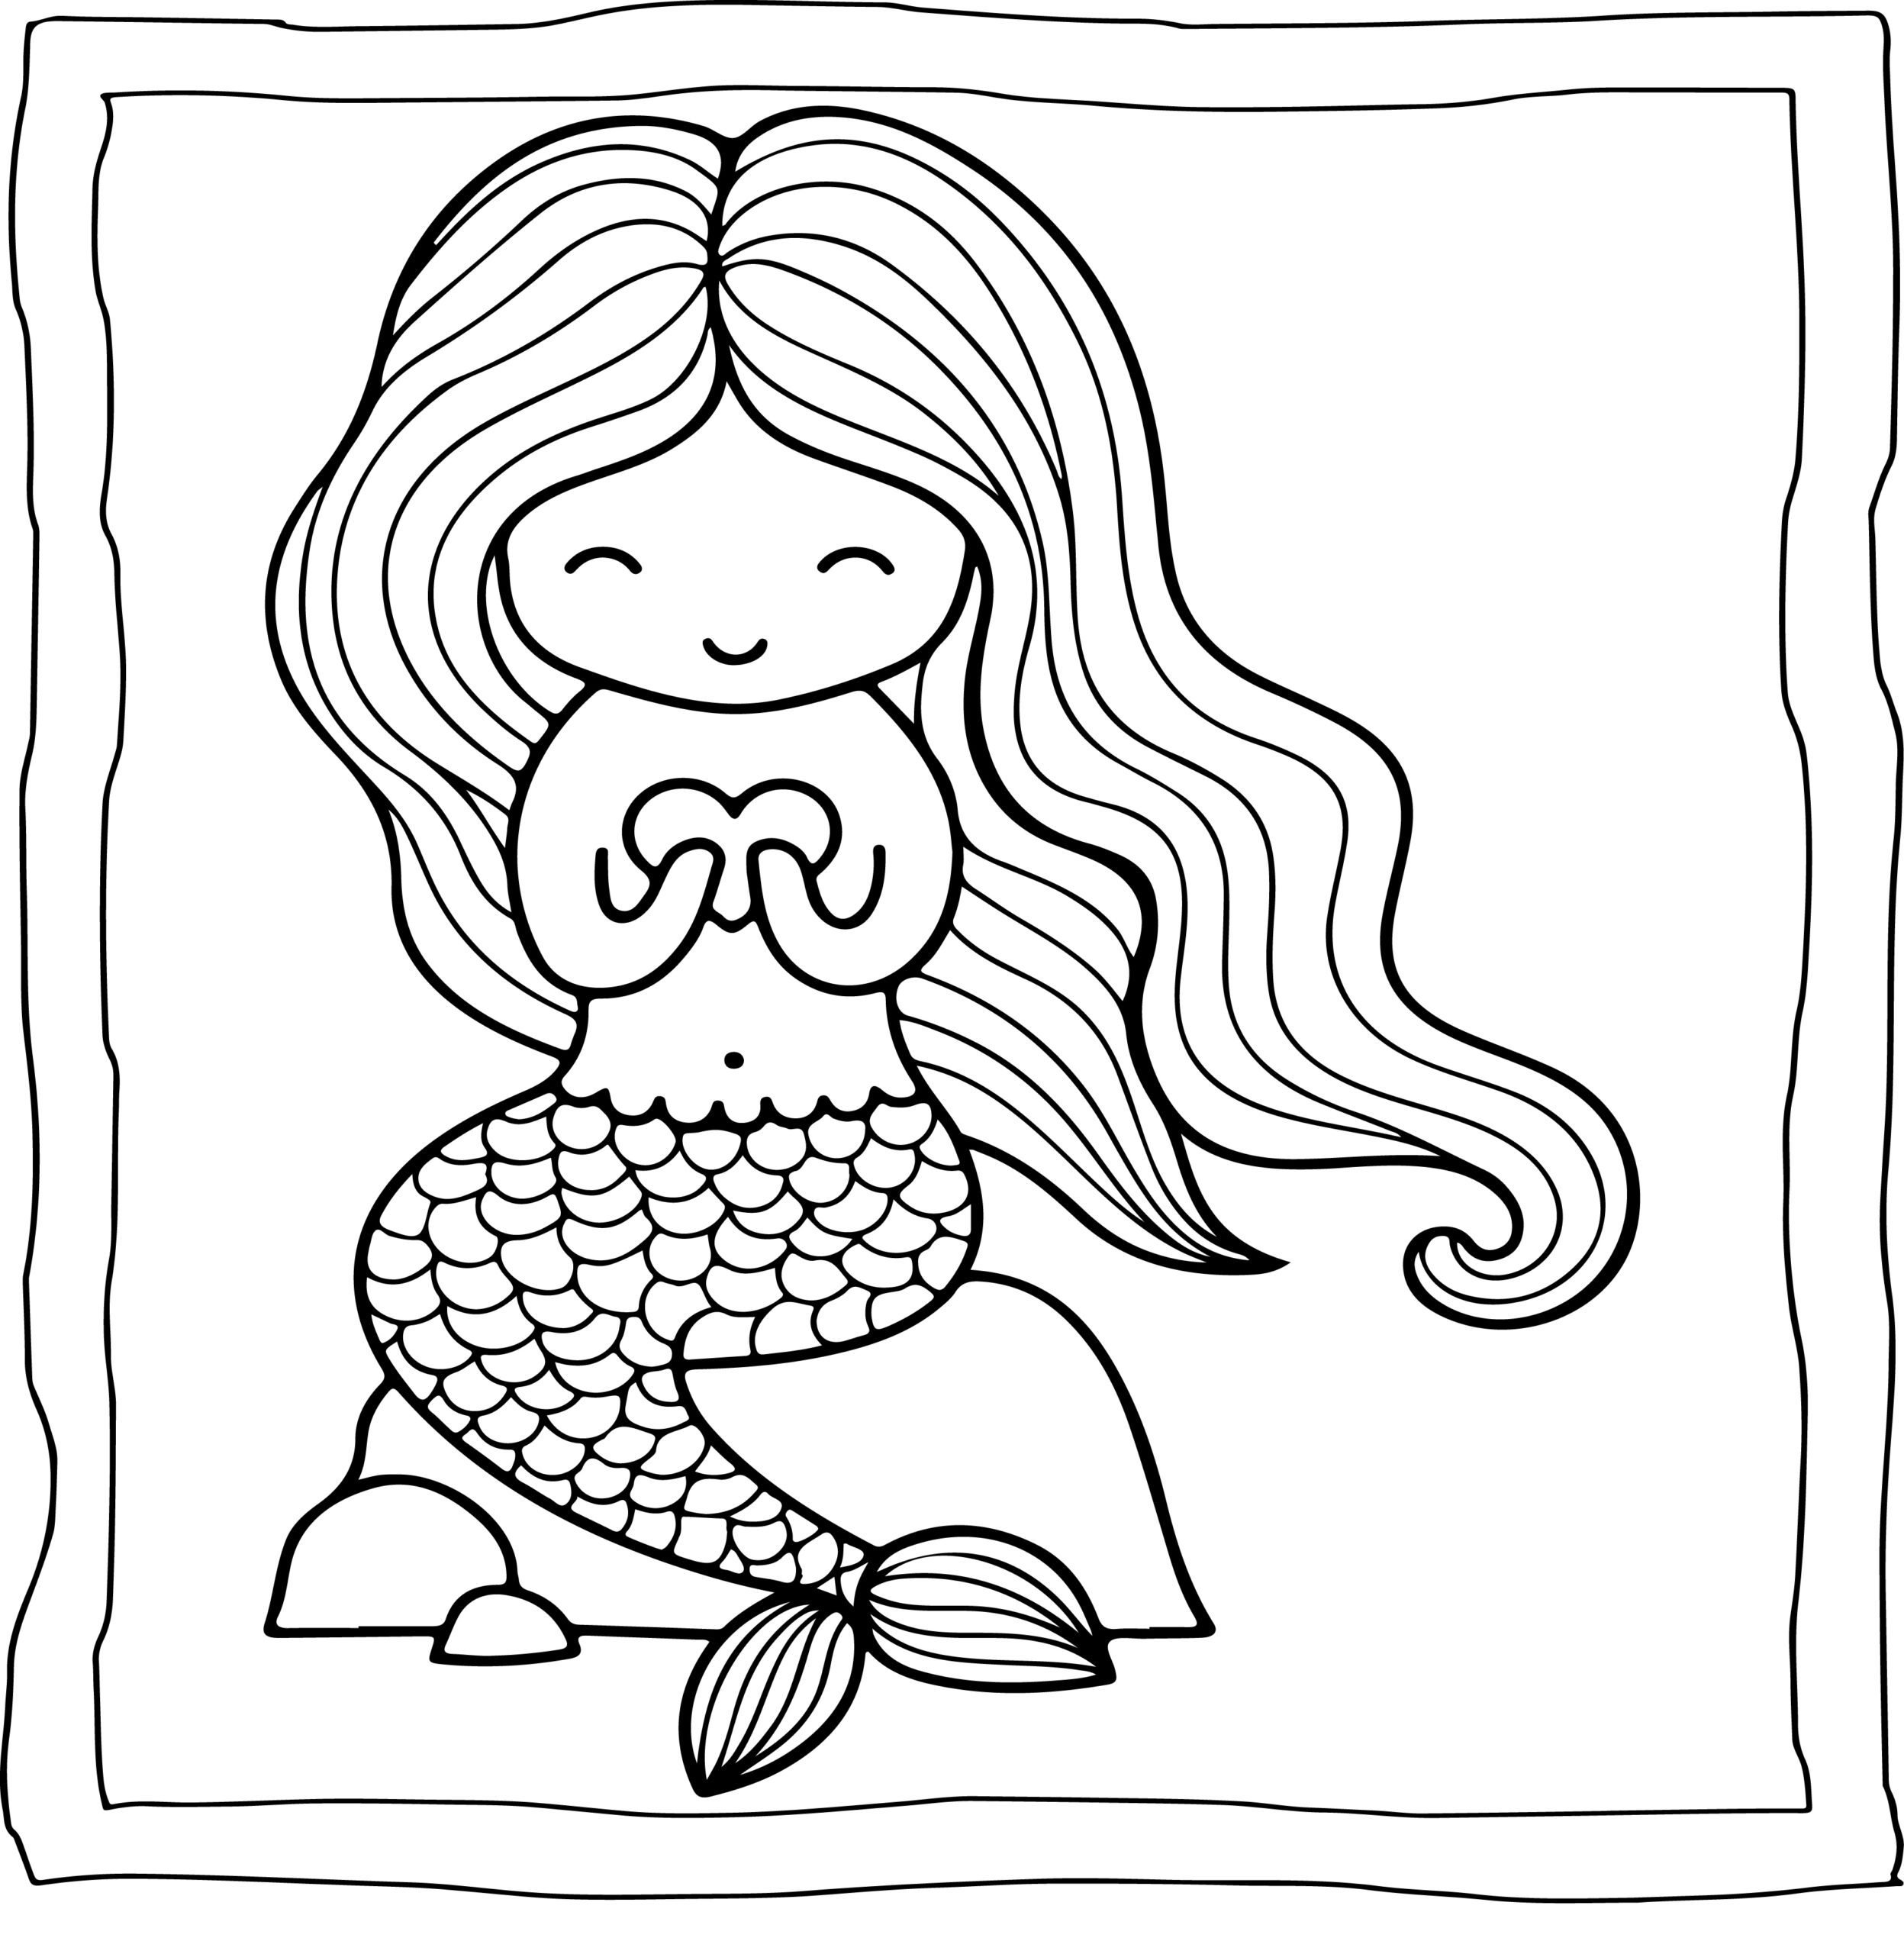 Mermaid coloring book easy and fun mermaid coloring pages for kids made by teachers